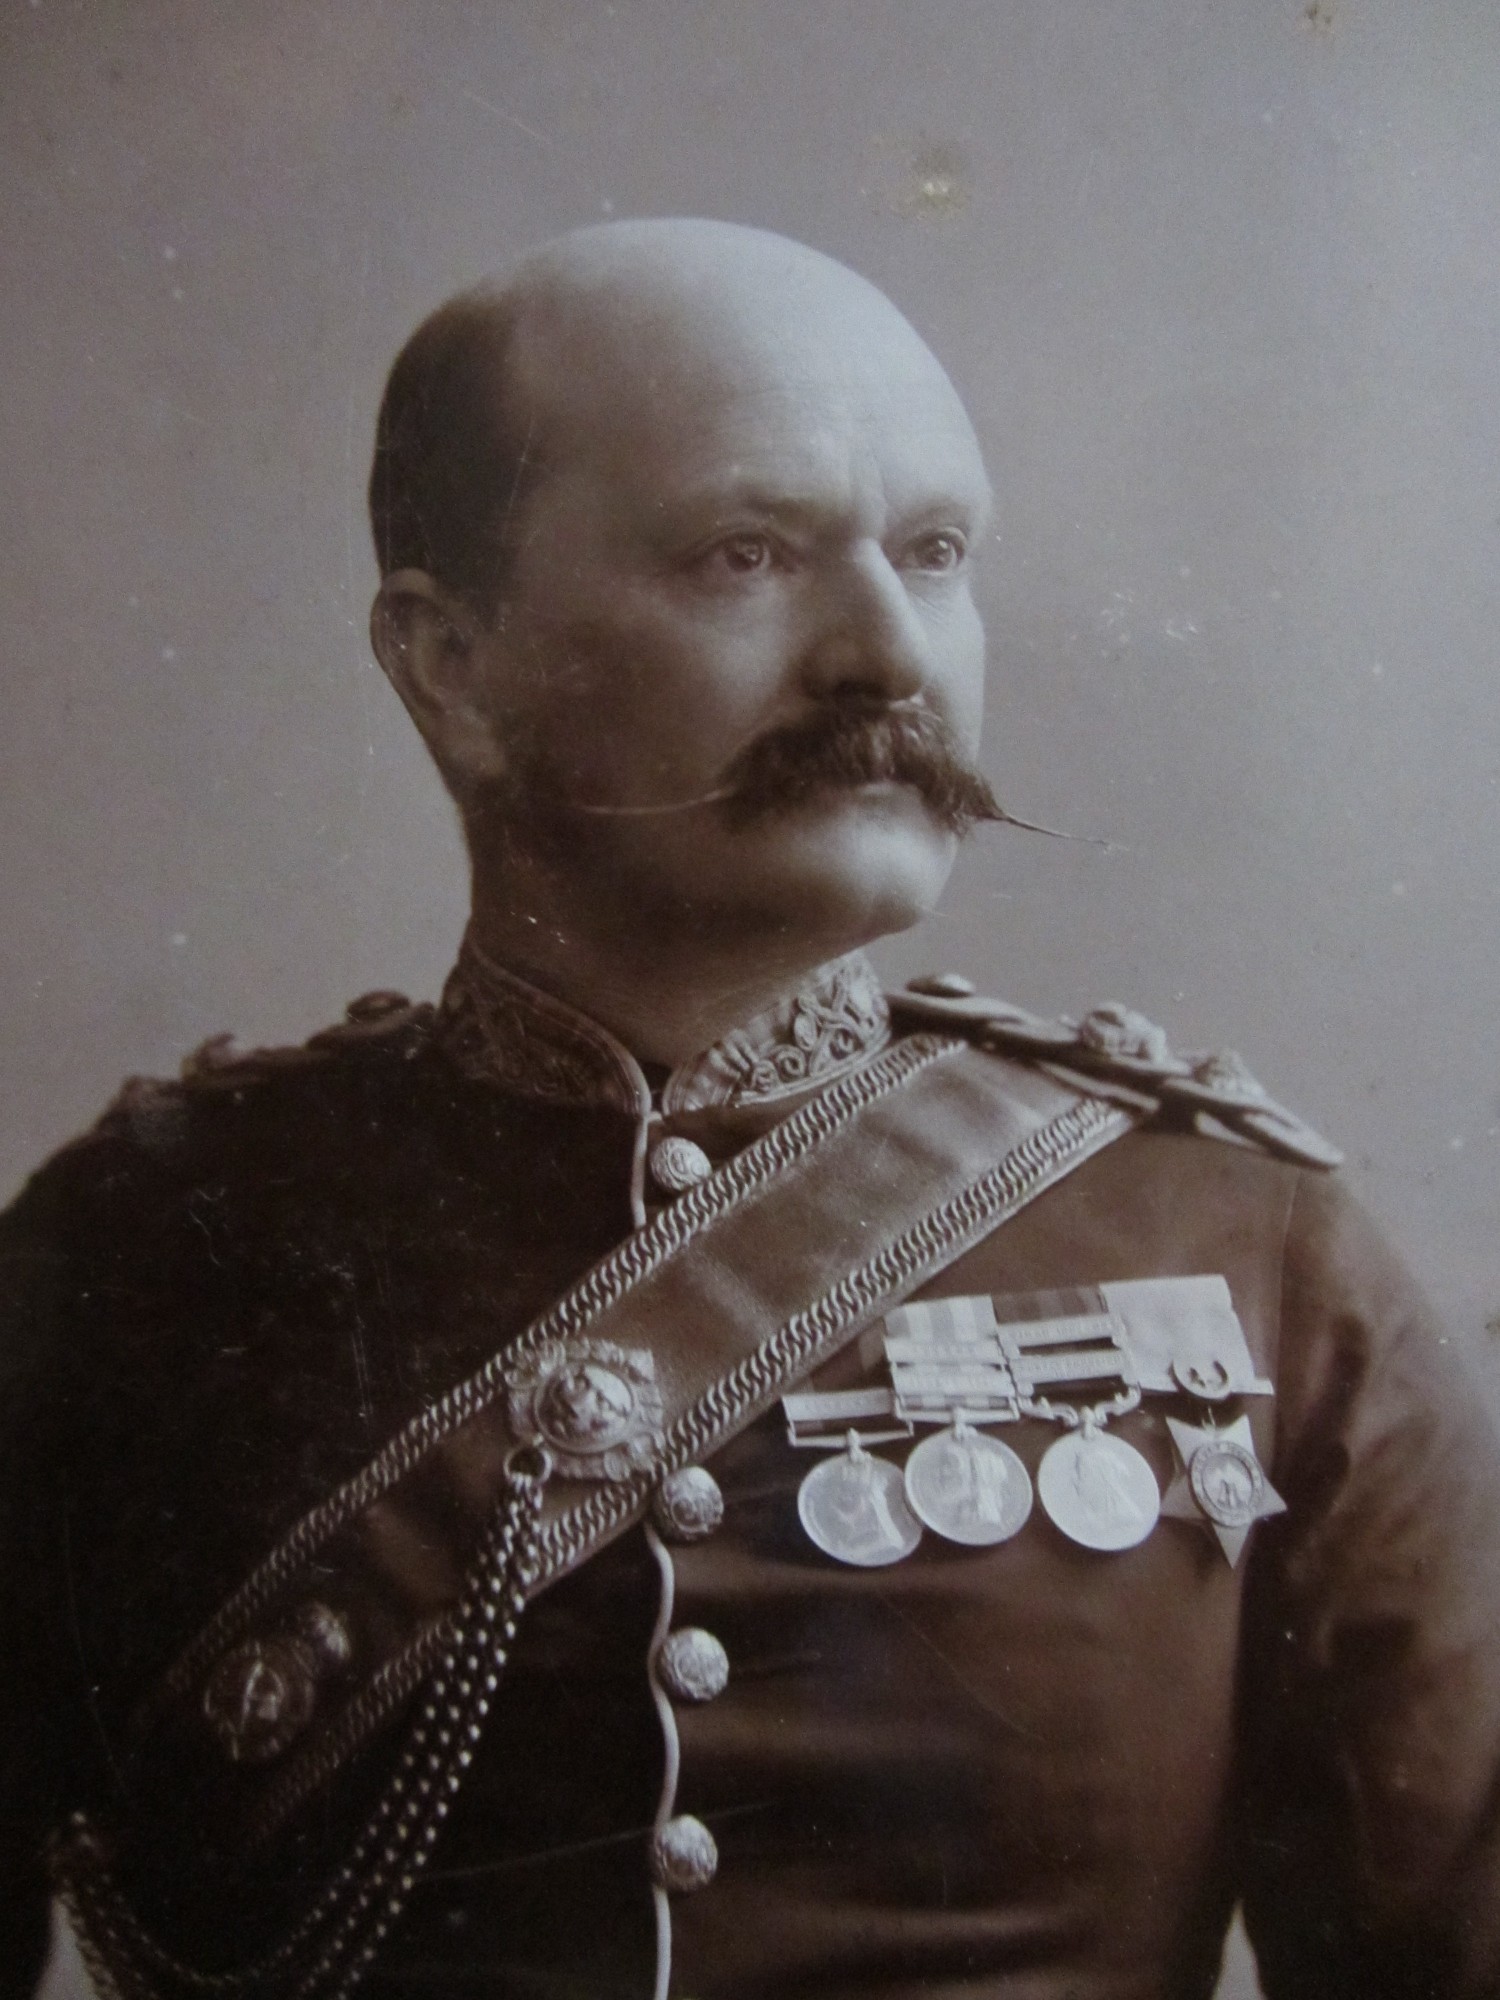 Old fashioned image of a bald man, with a large mustache and dressed in military uniform. 